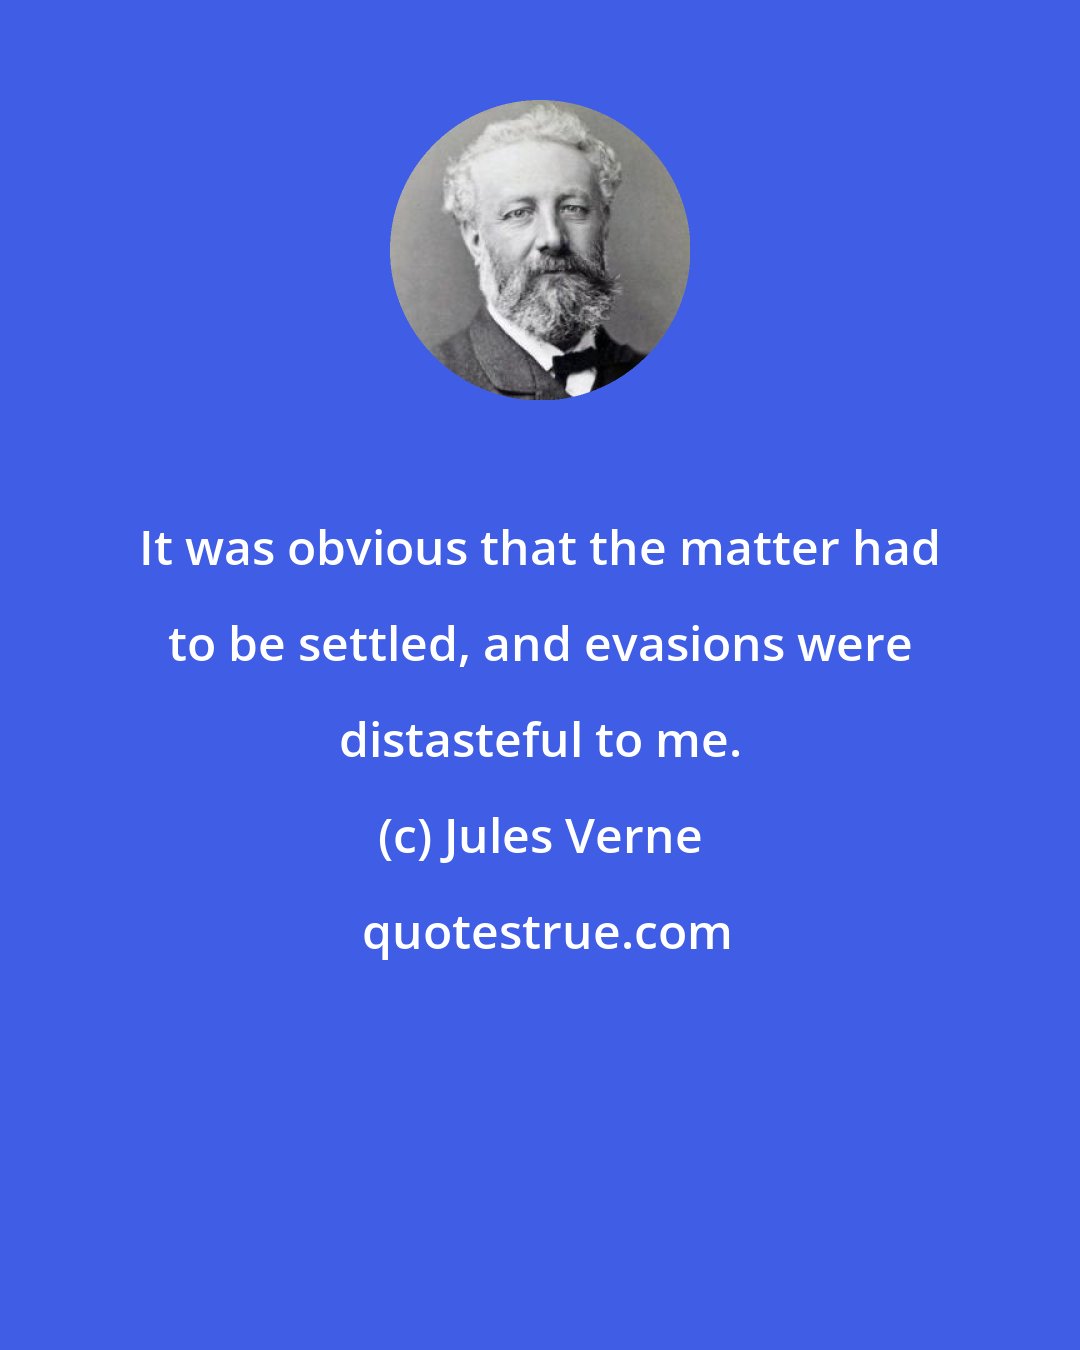 Jules Verne: It was obvious that the matter had to be settled, and evasions were distasteful to me.